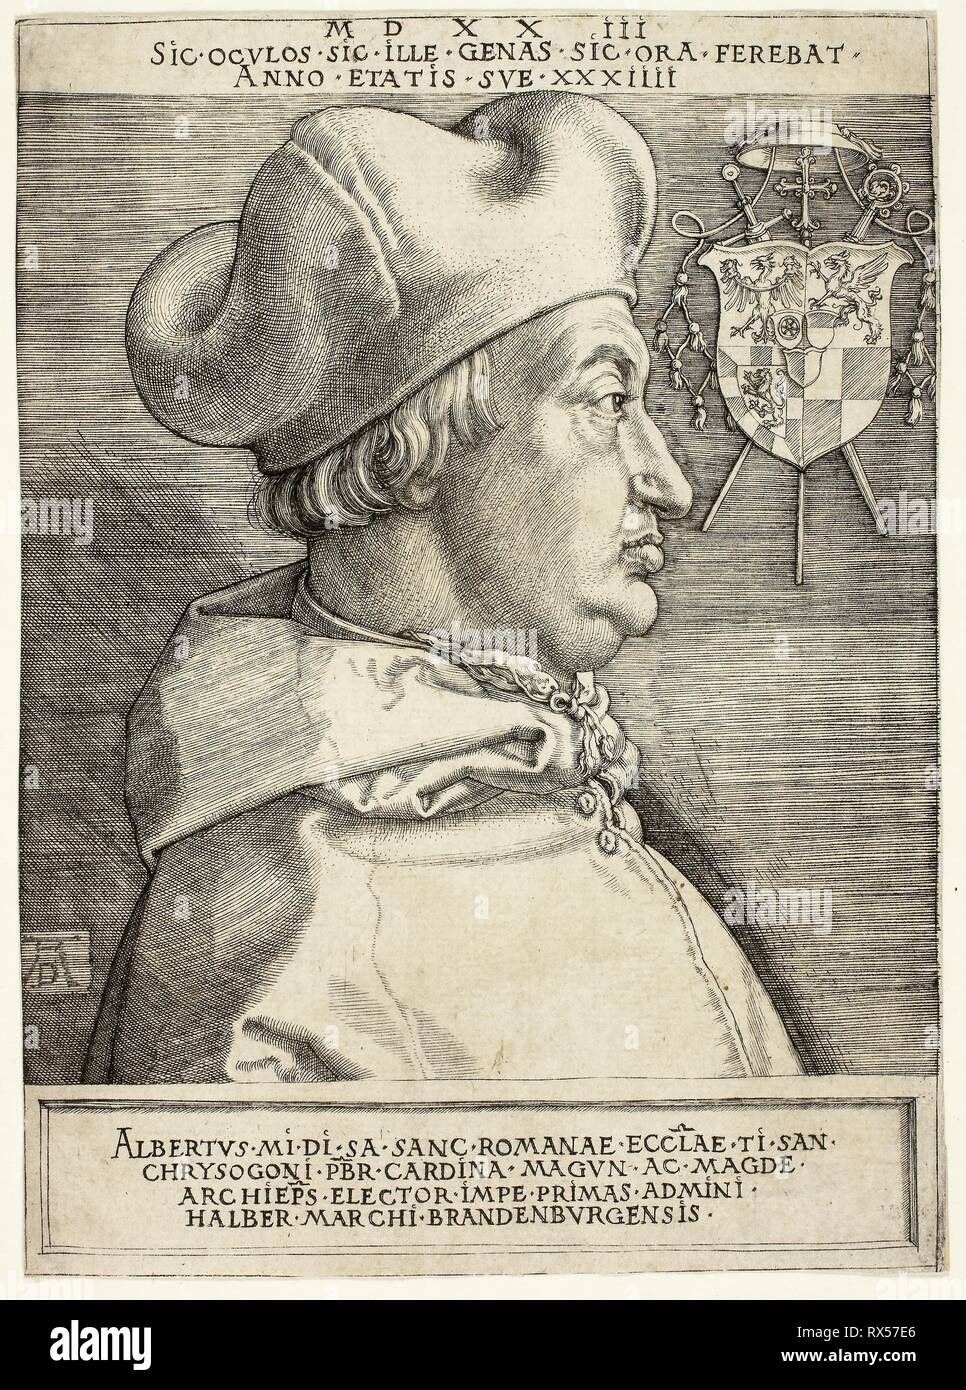 Cardinal Albrecht of Brandenburg (The Great Cardinal). Albrecht Dürer; German, 1471-1528. Date: 1523. Dimensions: 173 × 127 mm. Engraving in black on ivory laid paper. Origin: Germany. Museum: The Chicago Art Institute. Stock Photo